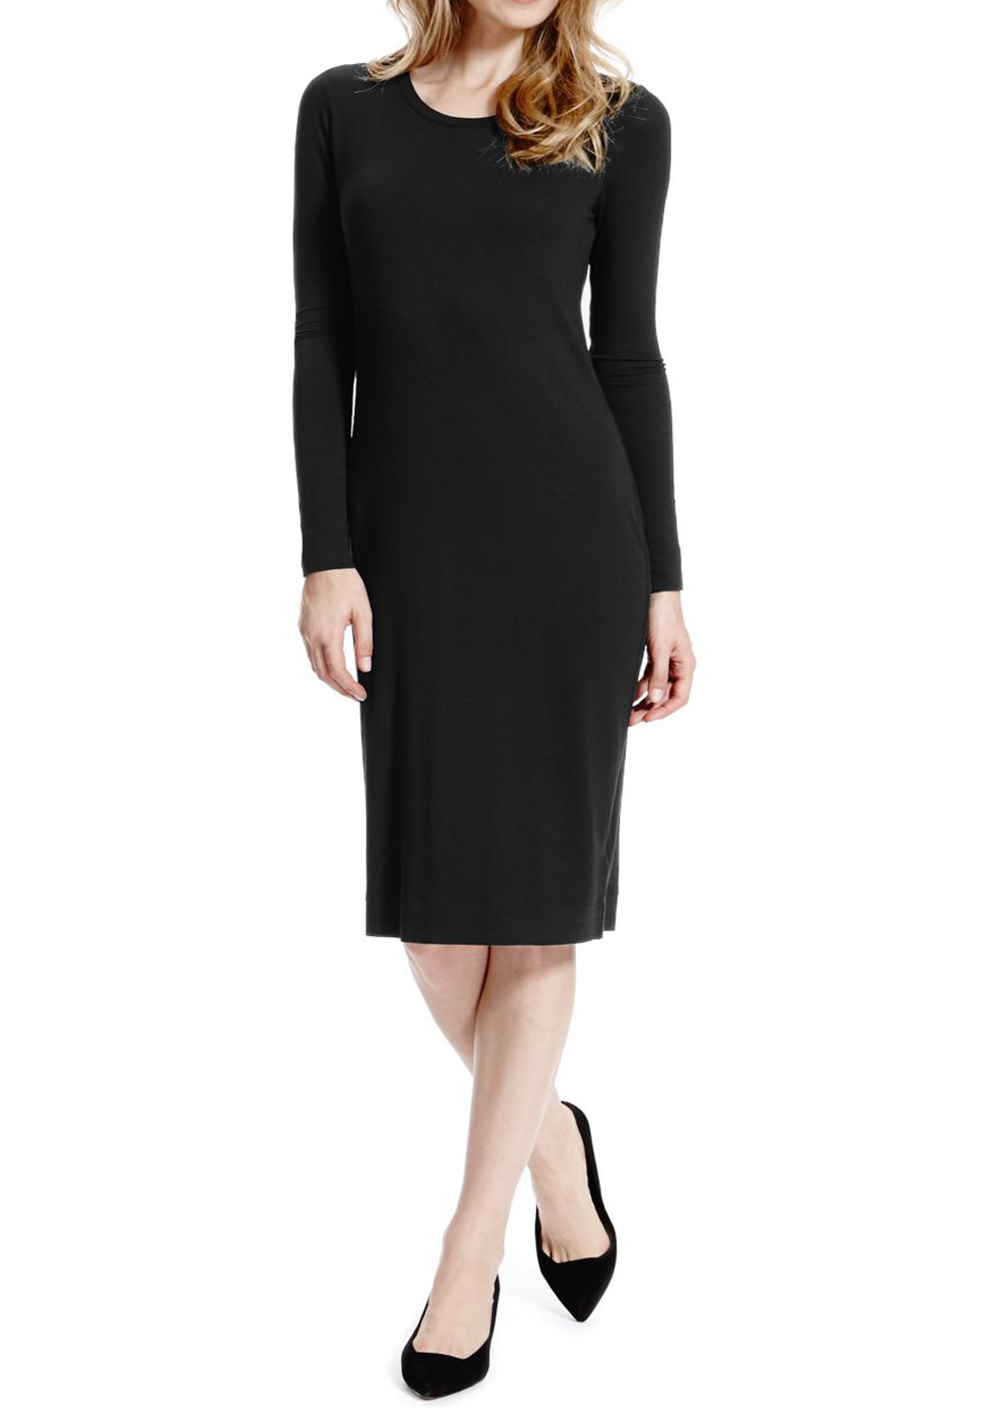 Marks and Spencer - - M&5 BLACK Long Sleeve Bodycon Midi Dress - Size 6 ...